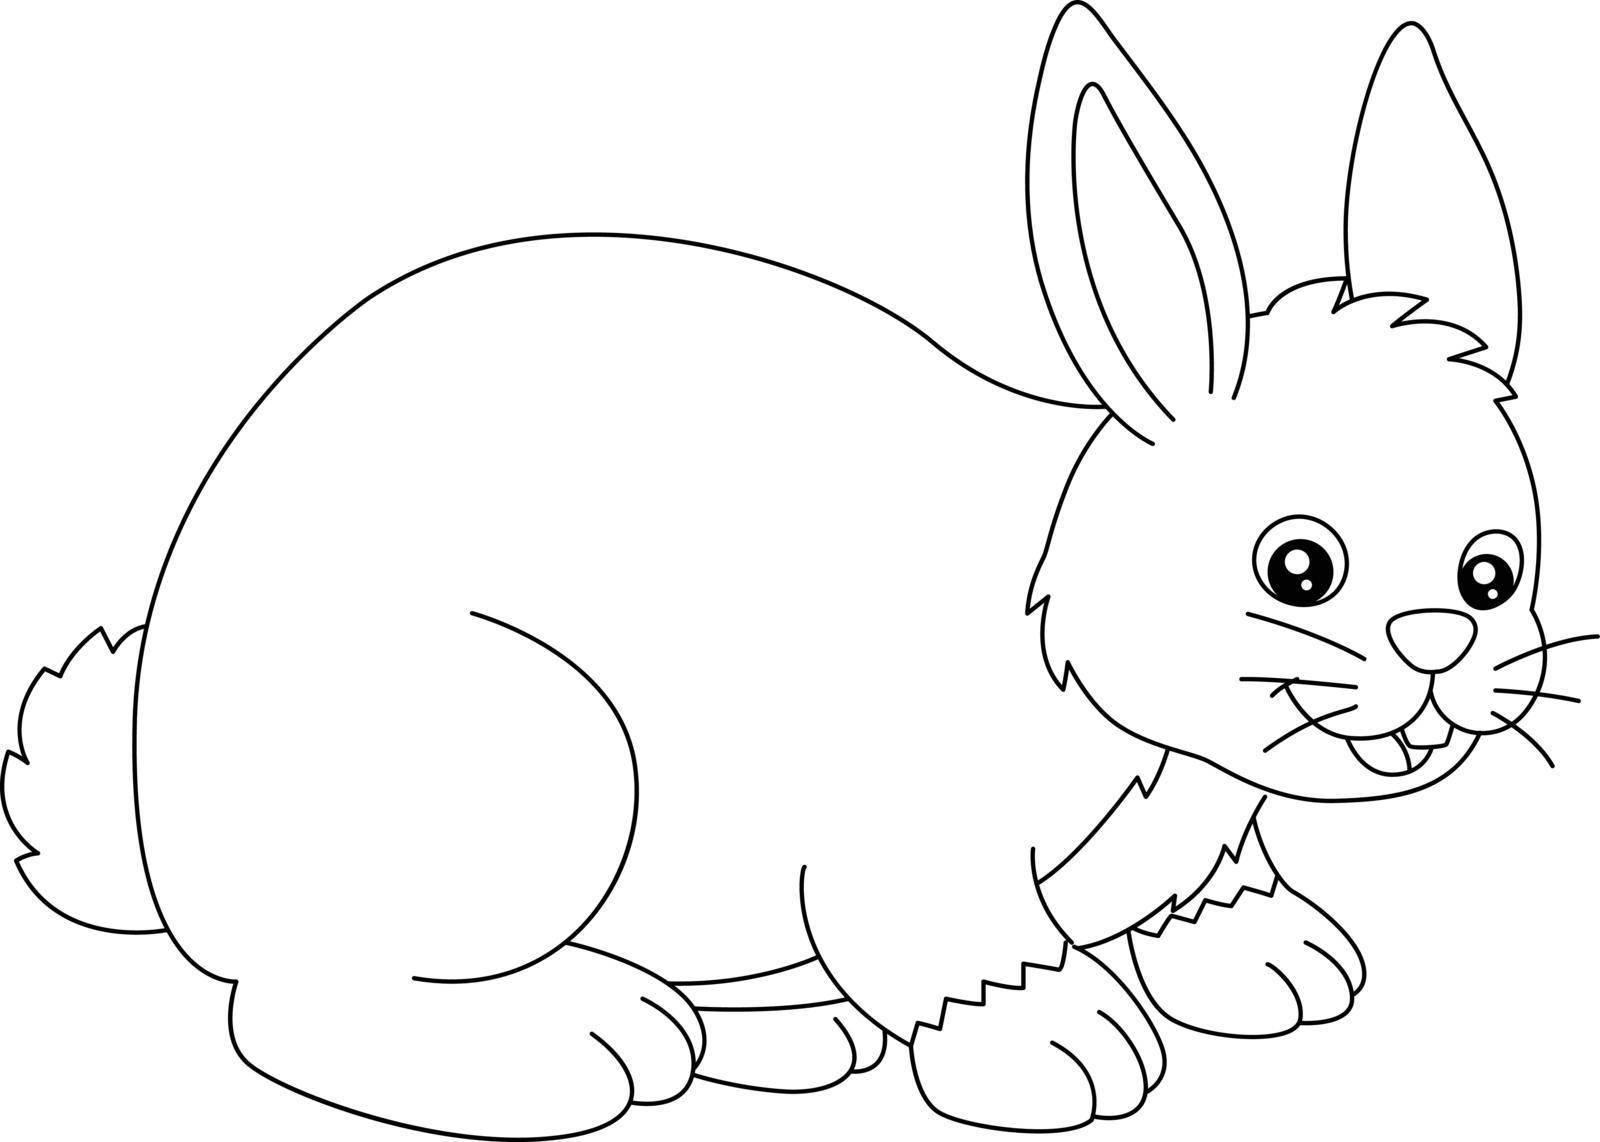 Rabbit Coloring Page Isolated for Kids by abbydesign